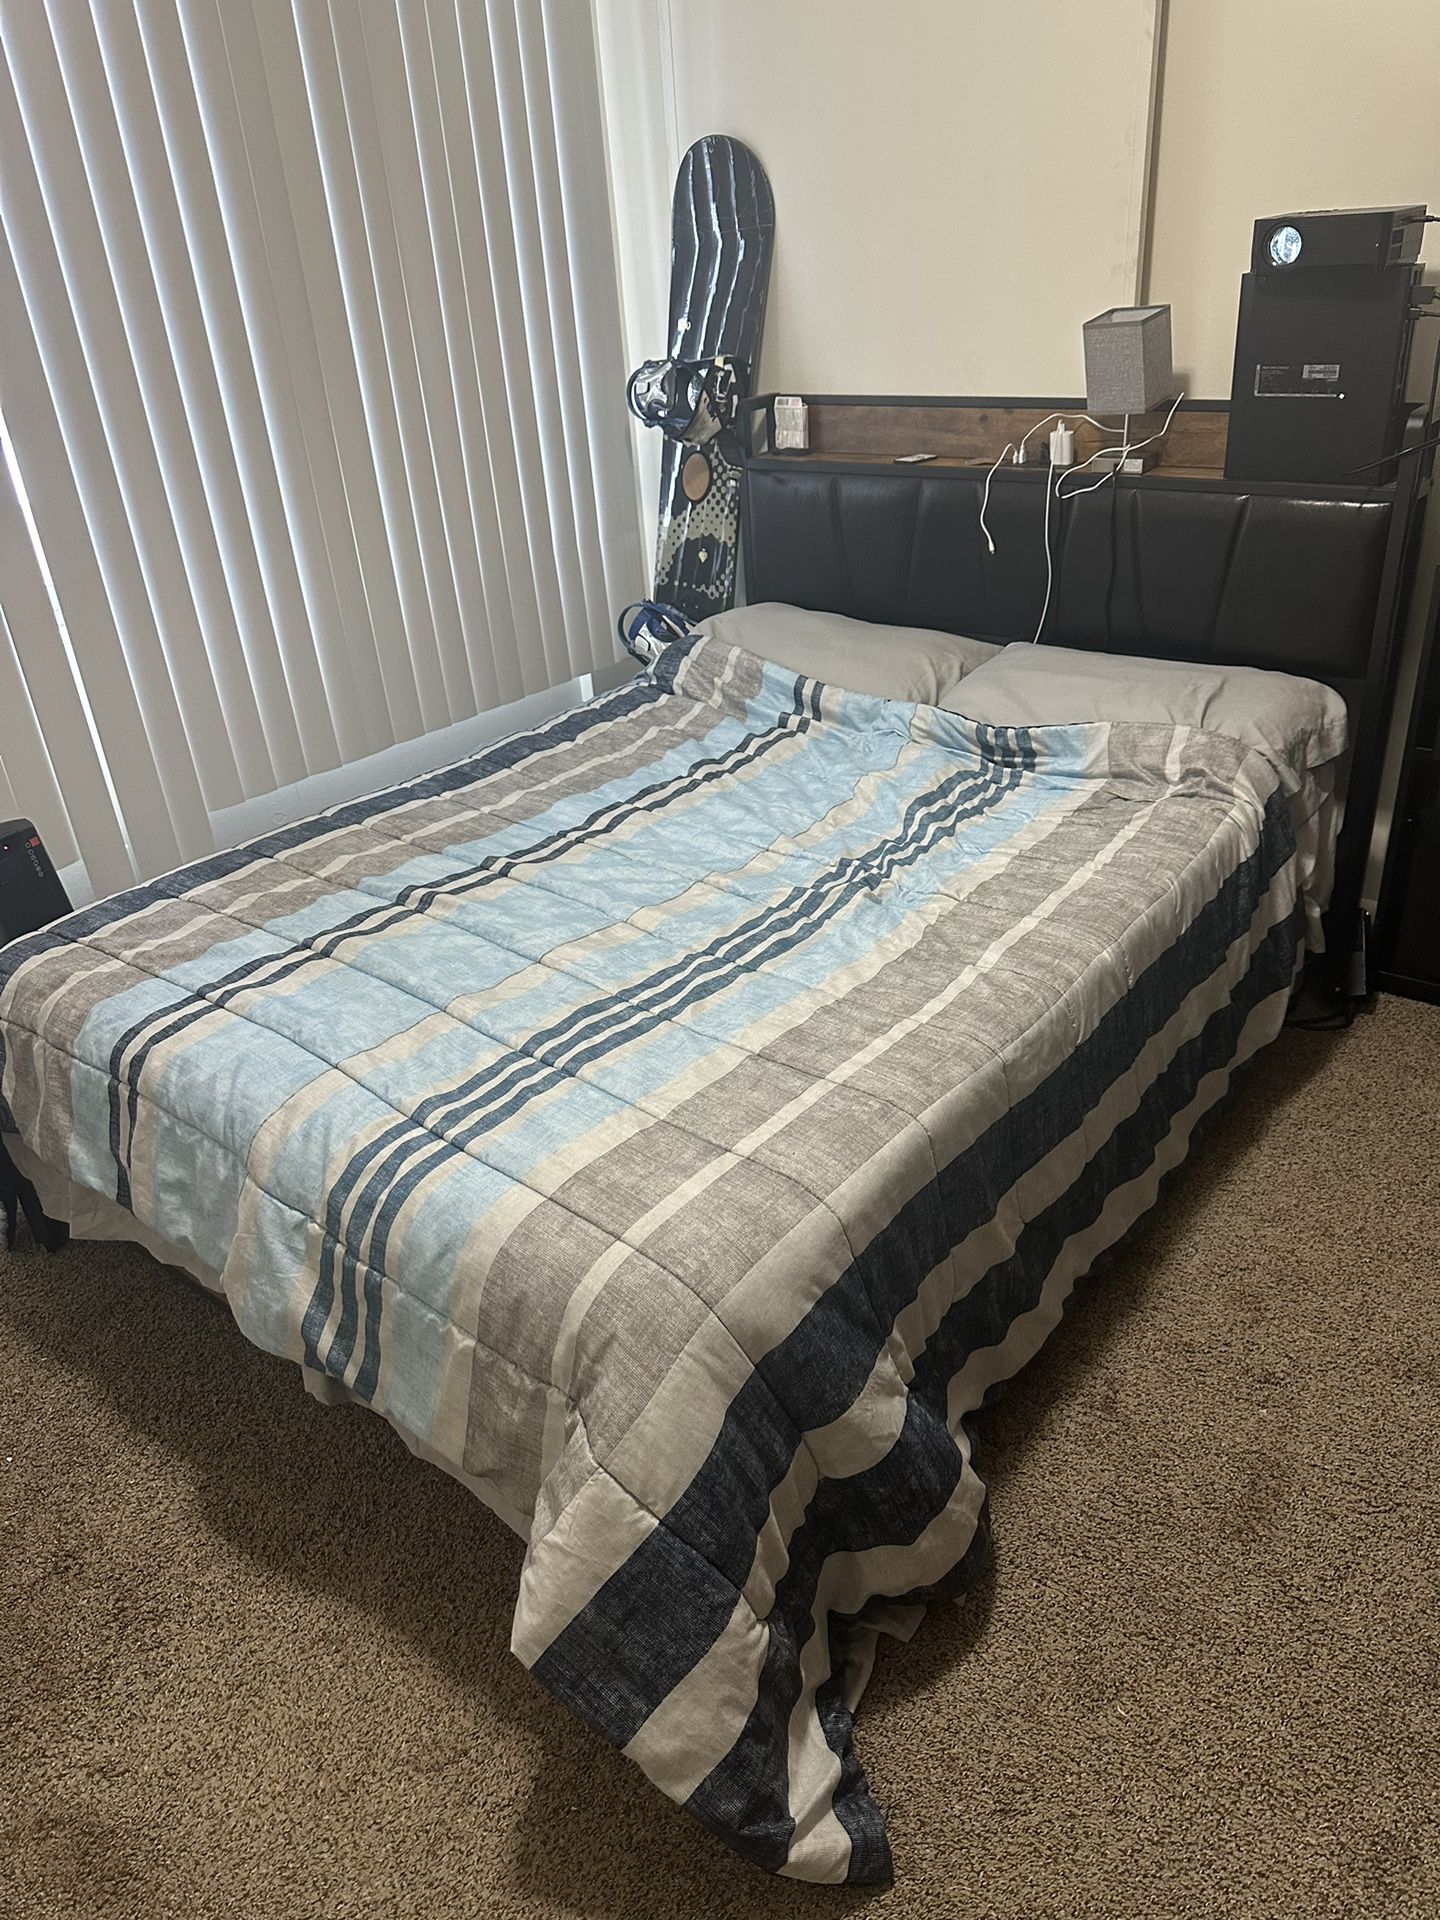 full size bed